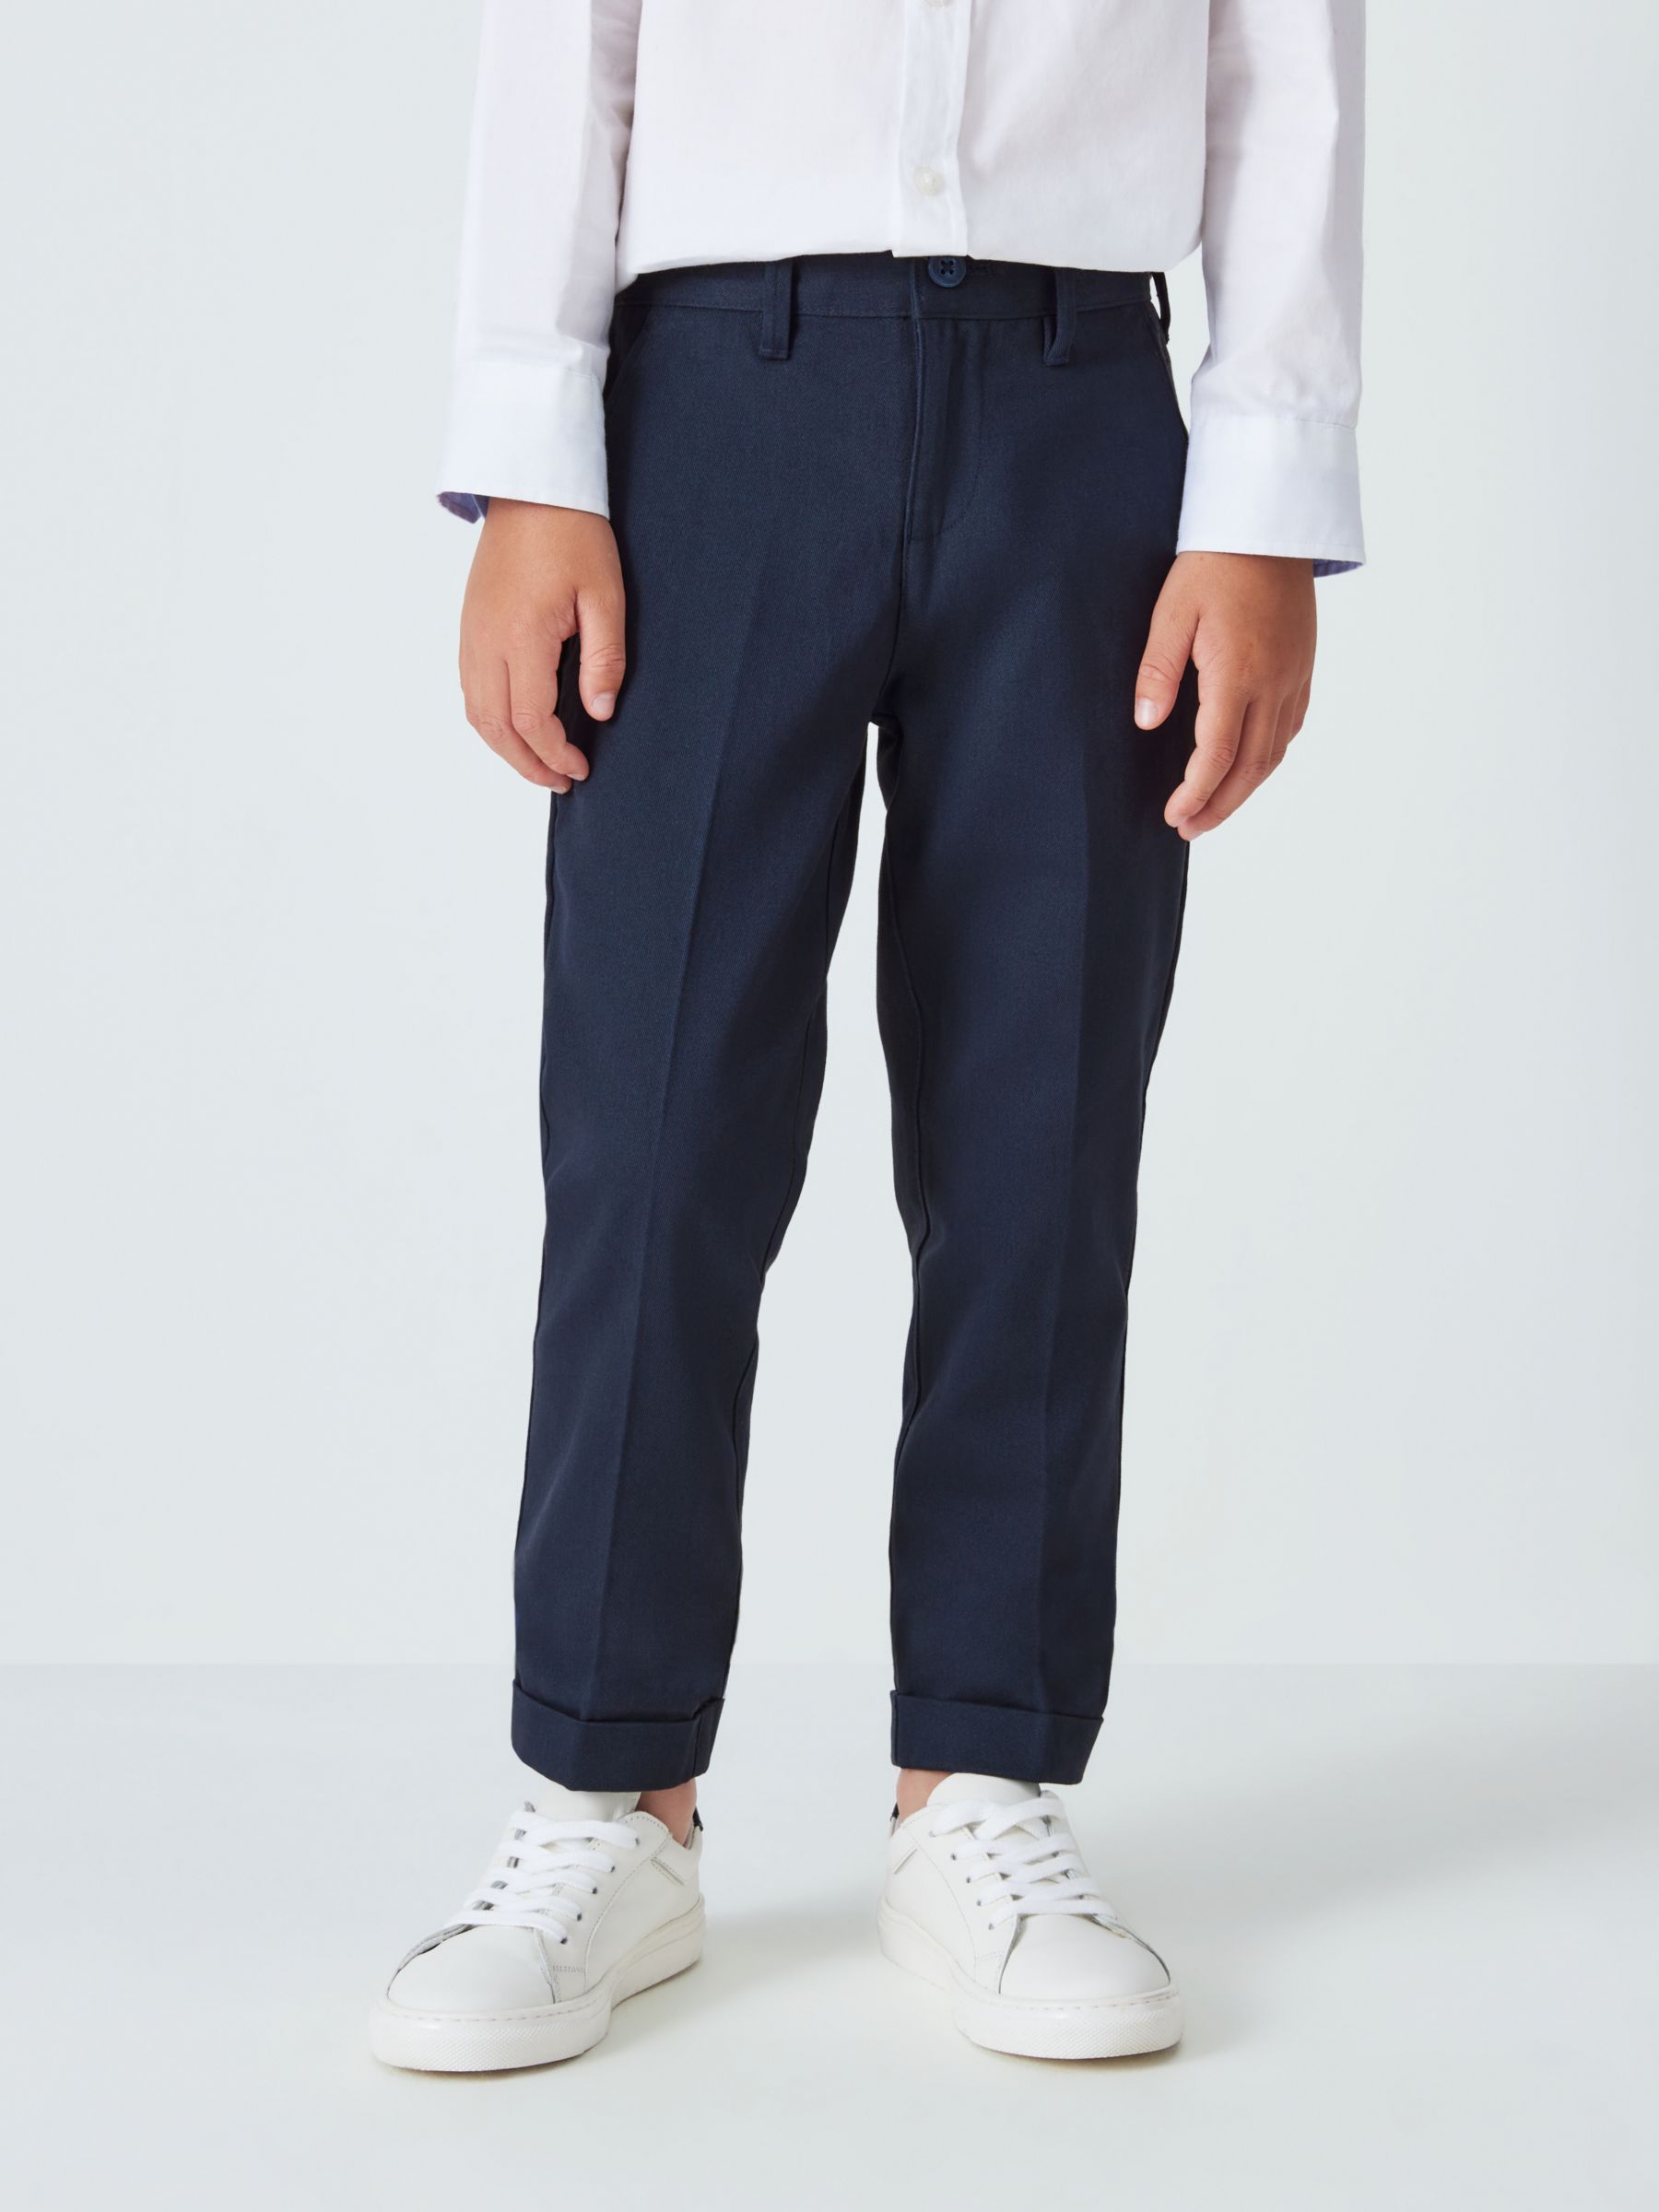 John Lewis Heirloom Collection Kids' Chino Trousers, Navy at John Lewis ...